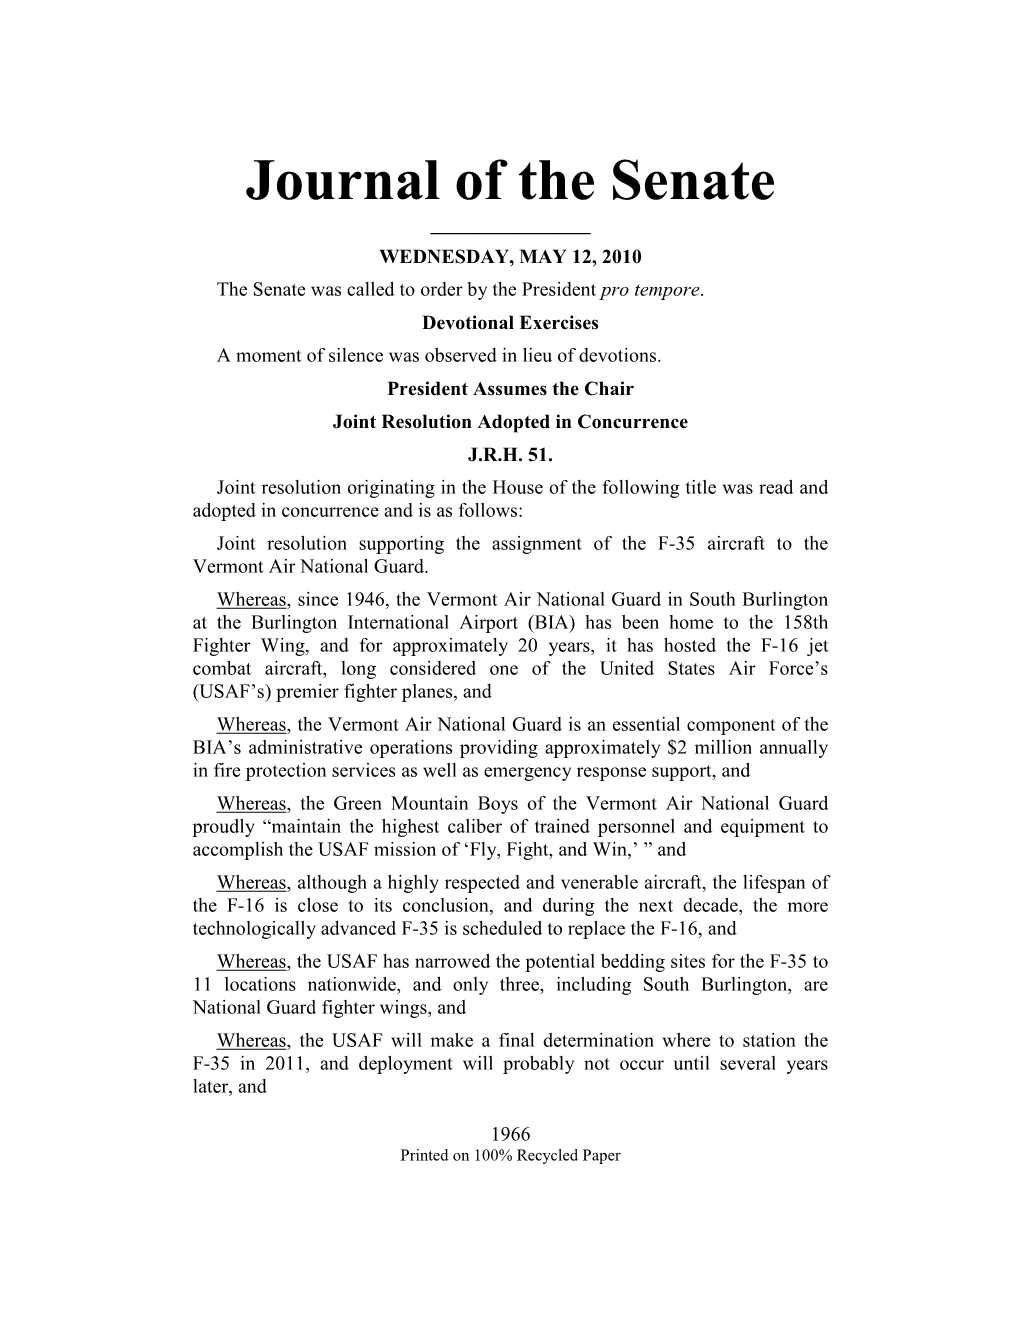 Journal of the Senate ______WEDNESDAY, MAY 12, 2010 the Senate Was Called to Order by the President Pro Tempore